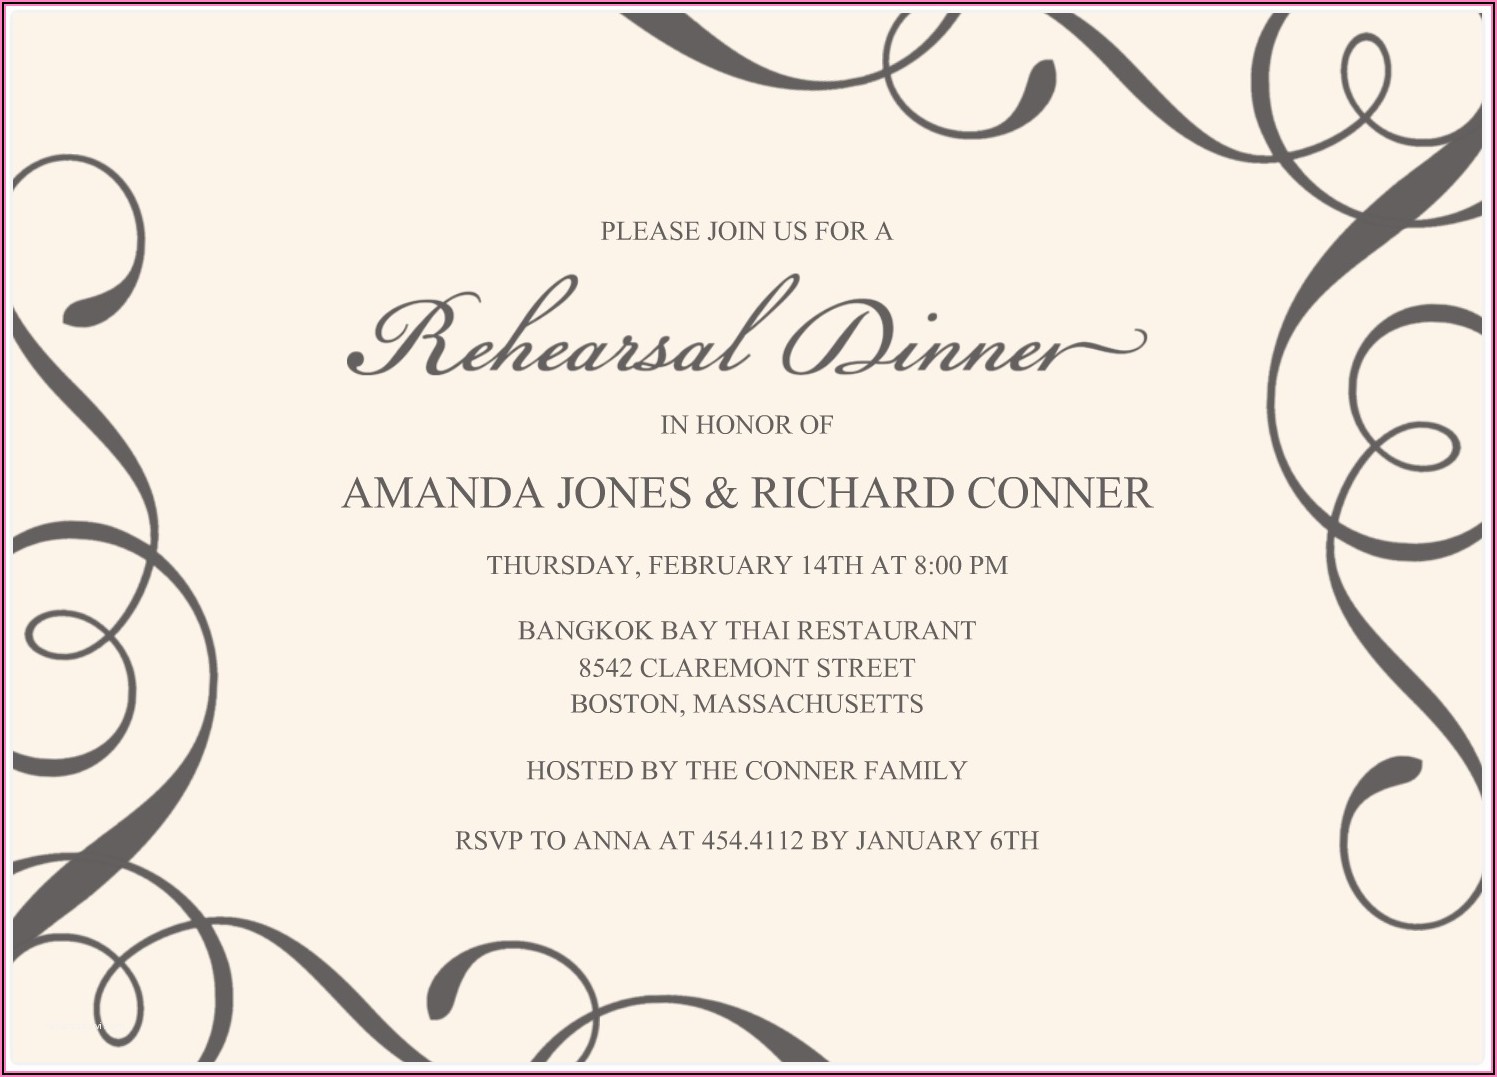 Gala Dinner Invitation Email Template